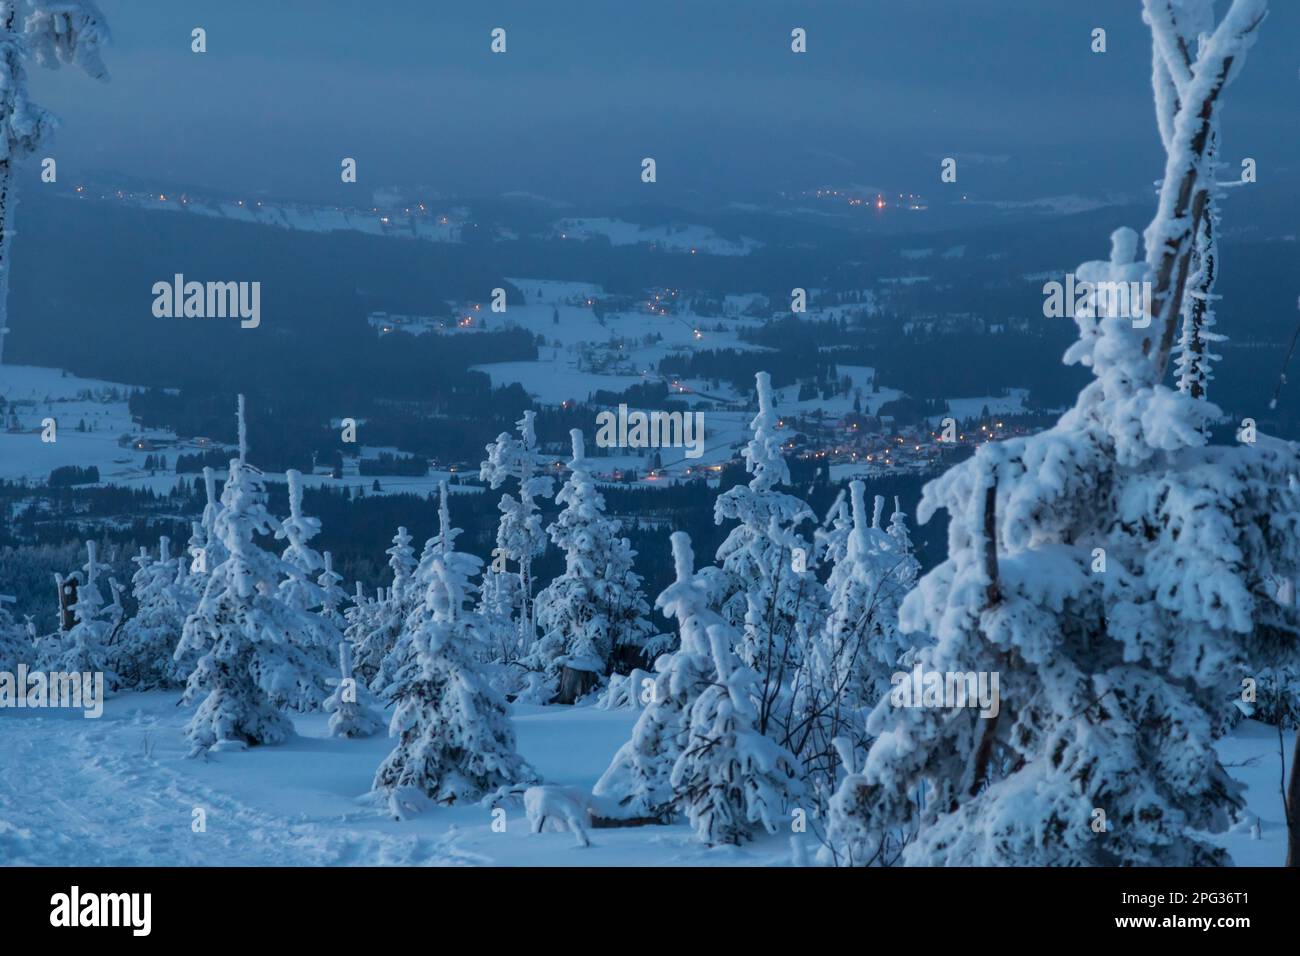 Landscape in winter on the Dreisesselberg at night in winter. Bavarian Forest, Bavaria, Germany Stock Photo